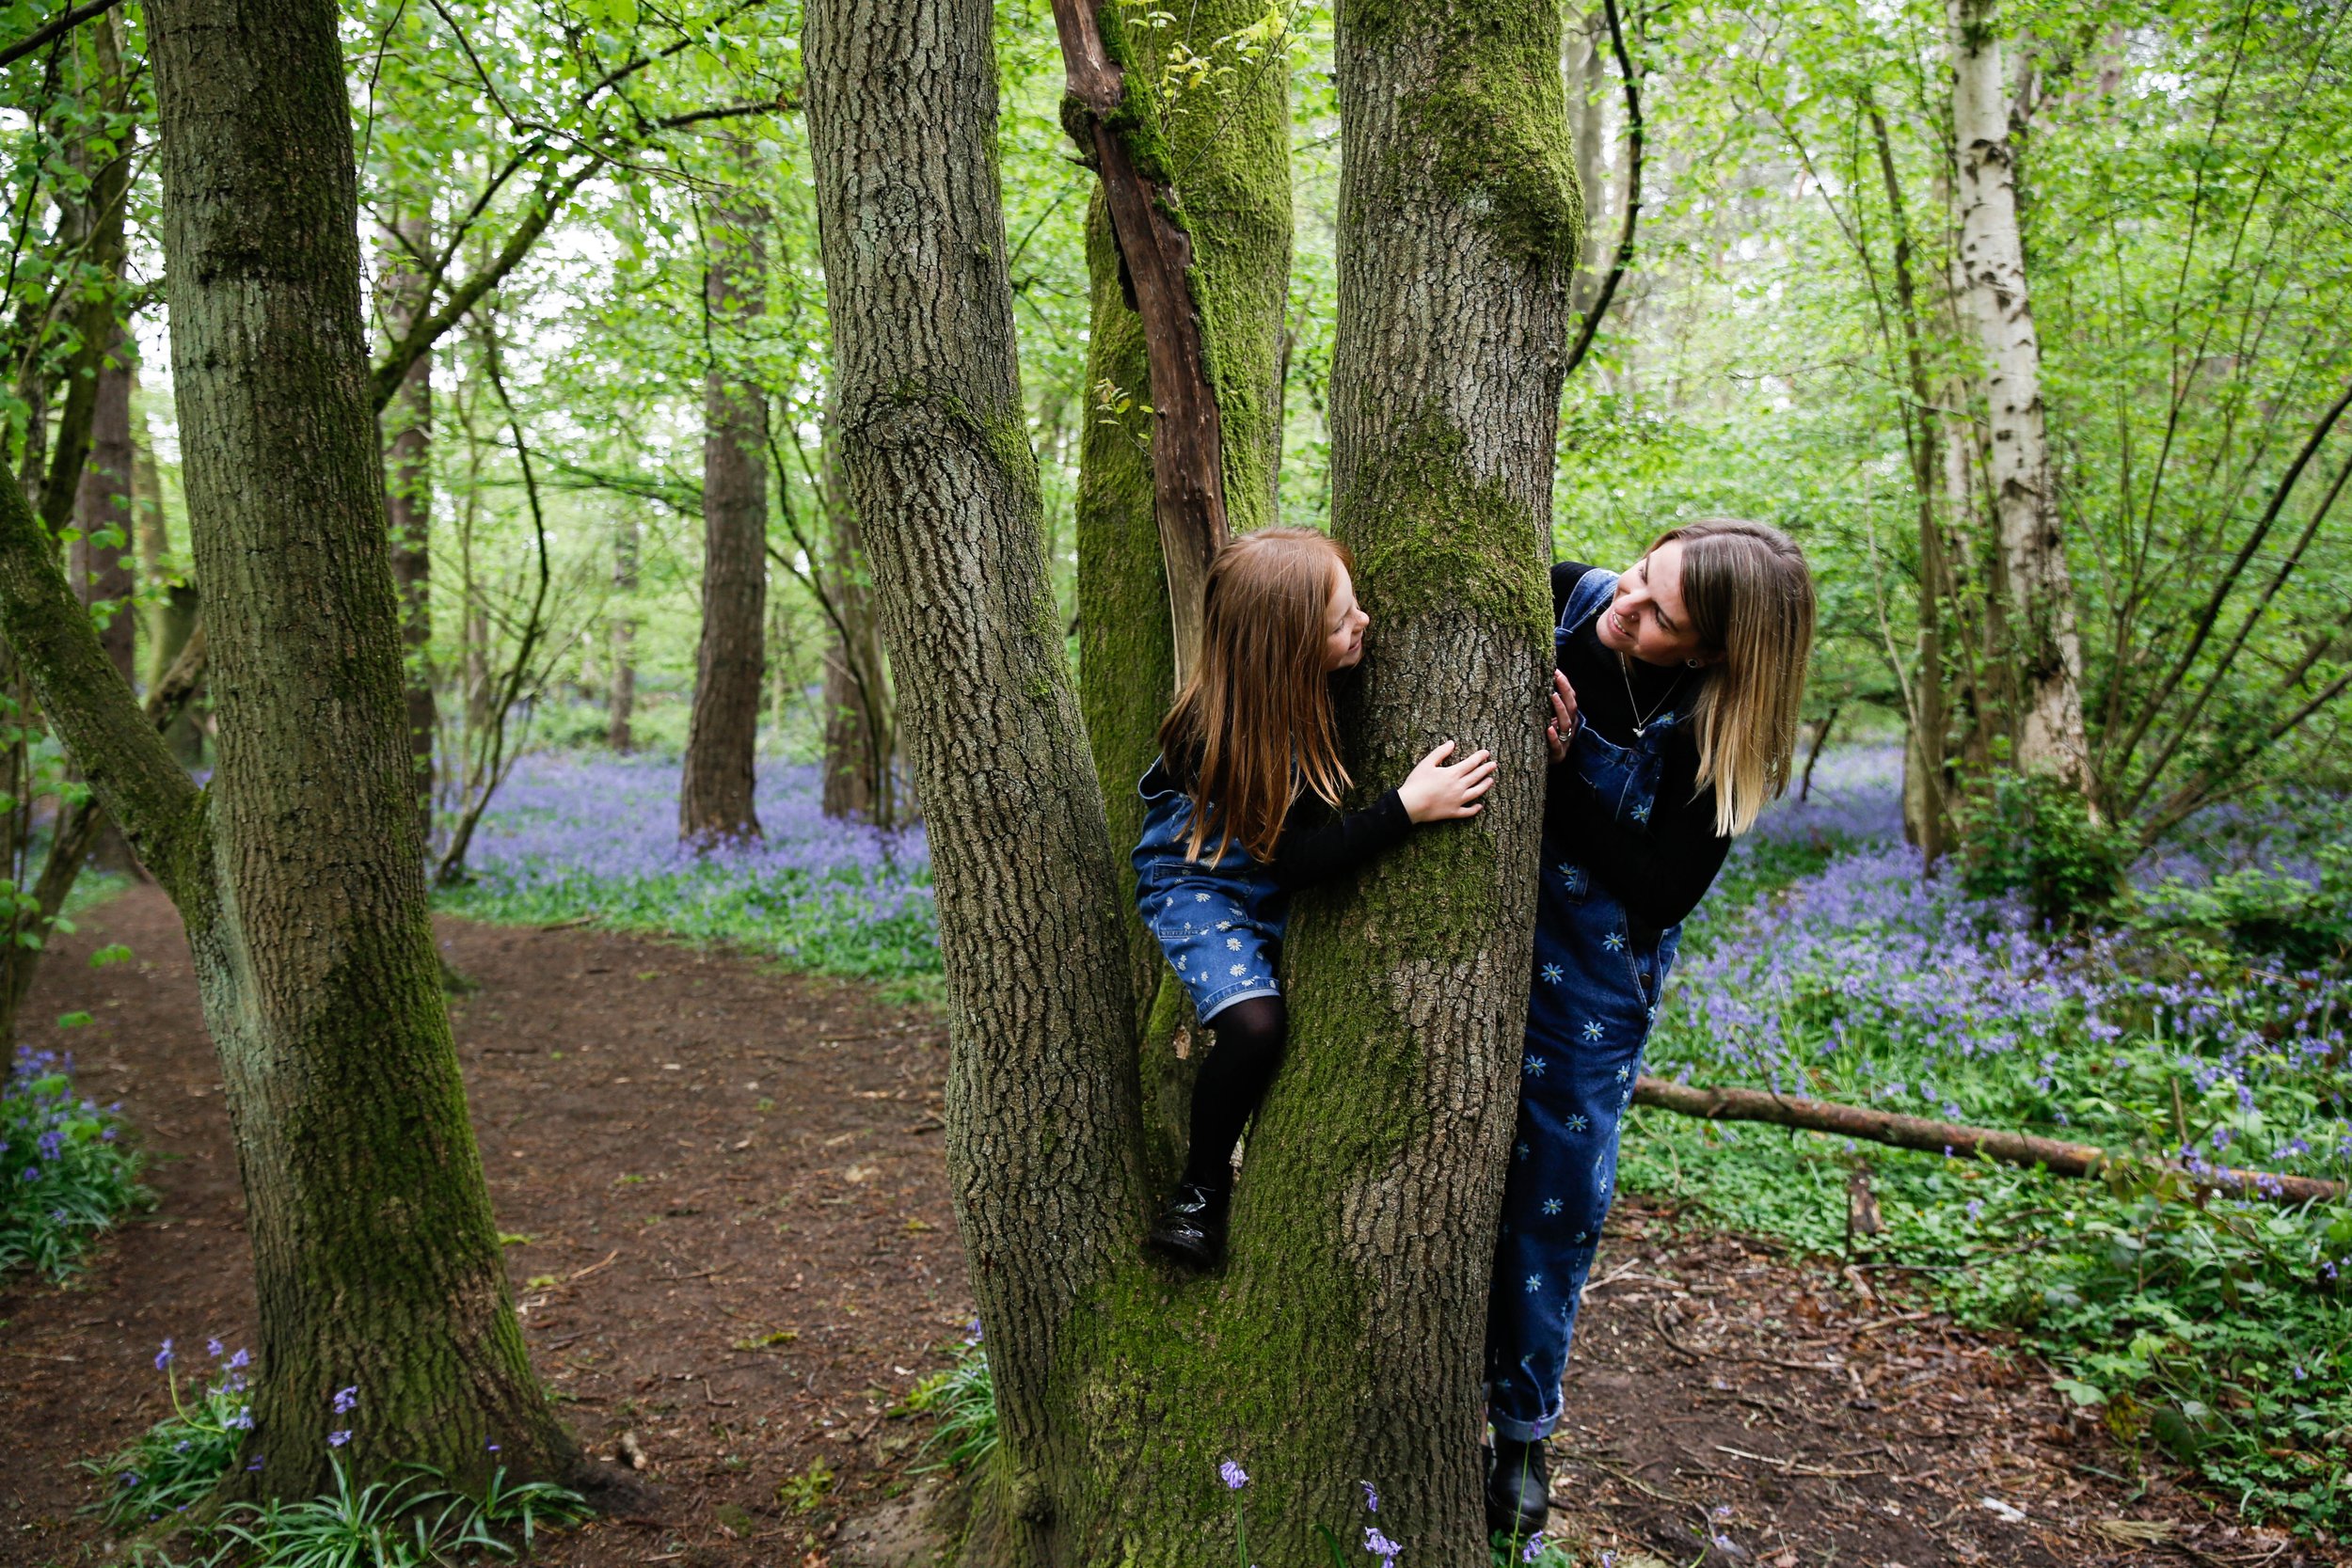 MUM AND DAUGHTER PHOTO SHOOT IN THE BLUEBELLS | BERKSHIRE PORTRAIT SHOOTS12 choice .JPG